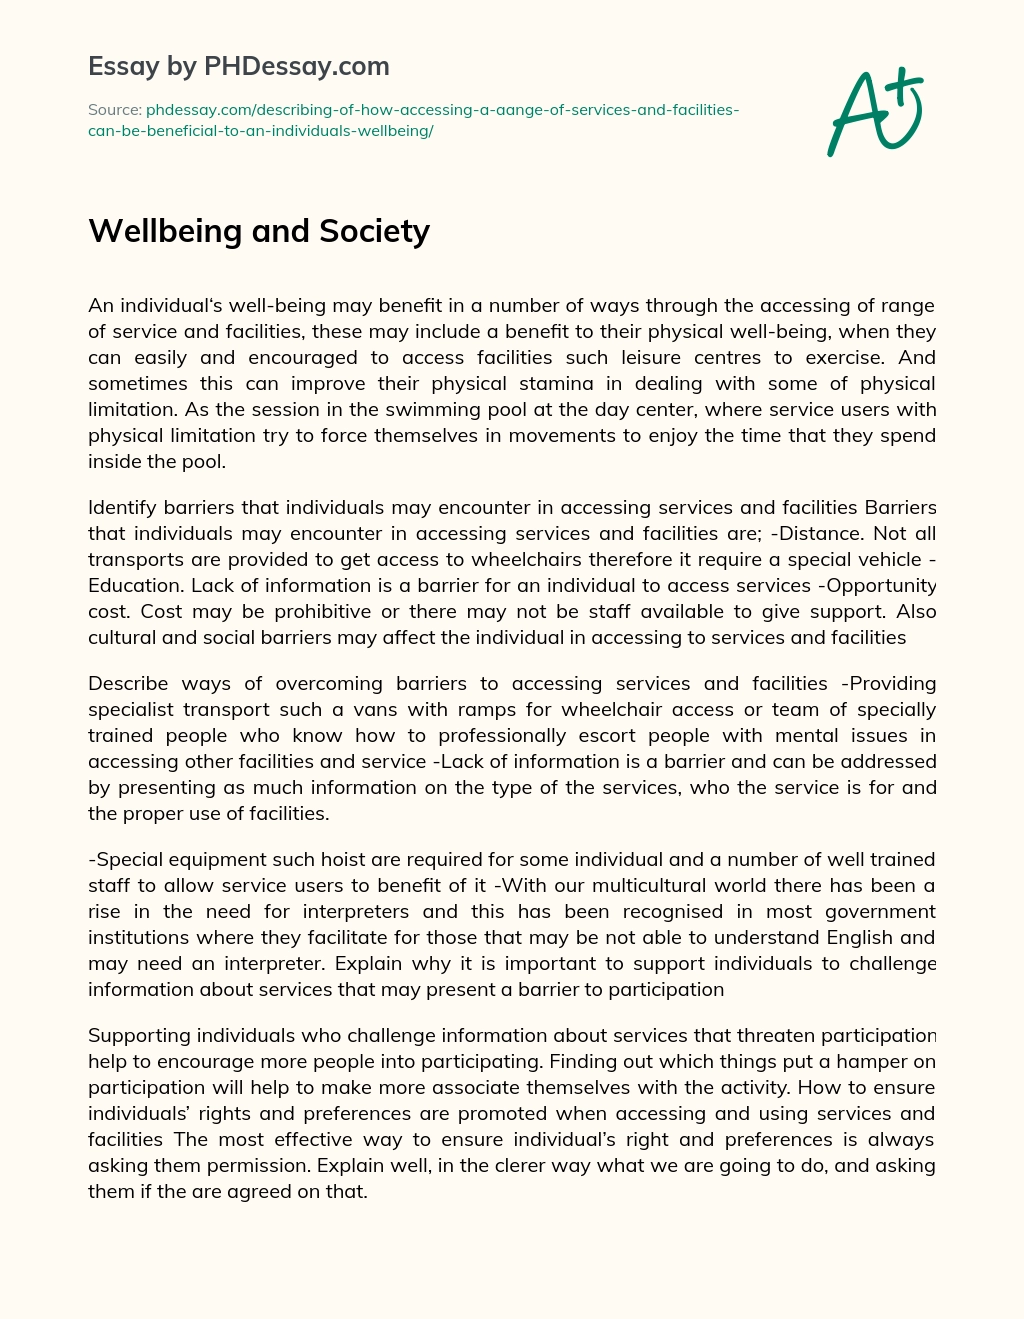 Wellbeing and Society essay